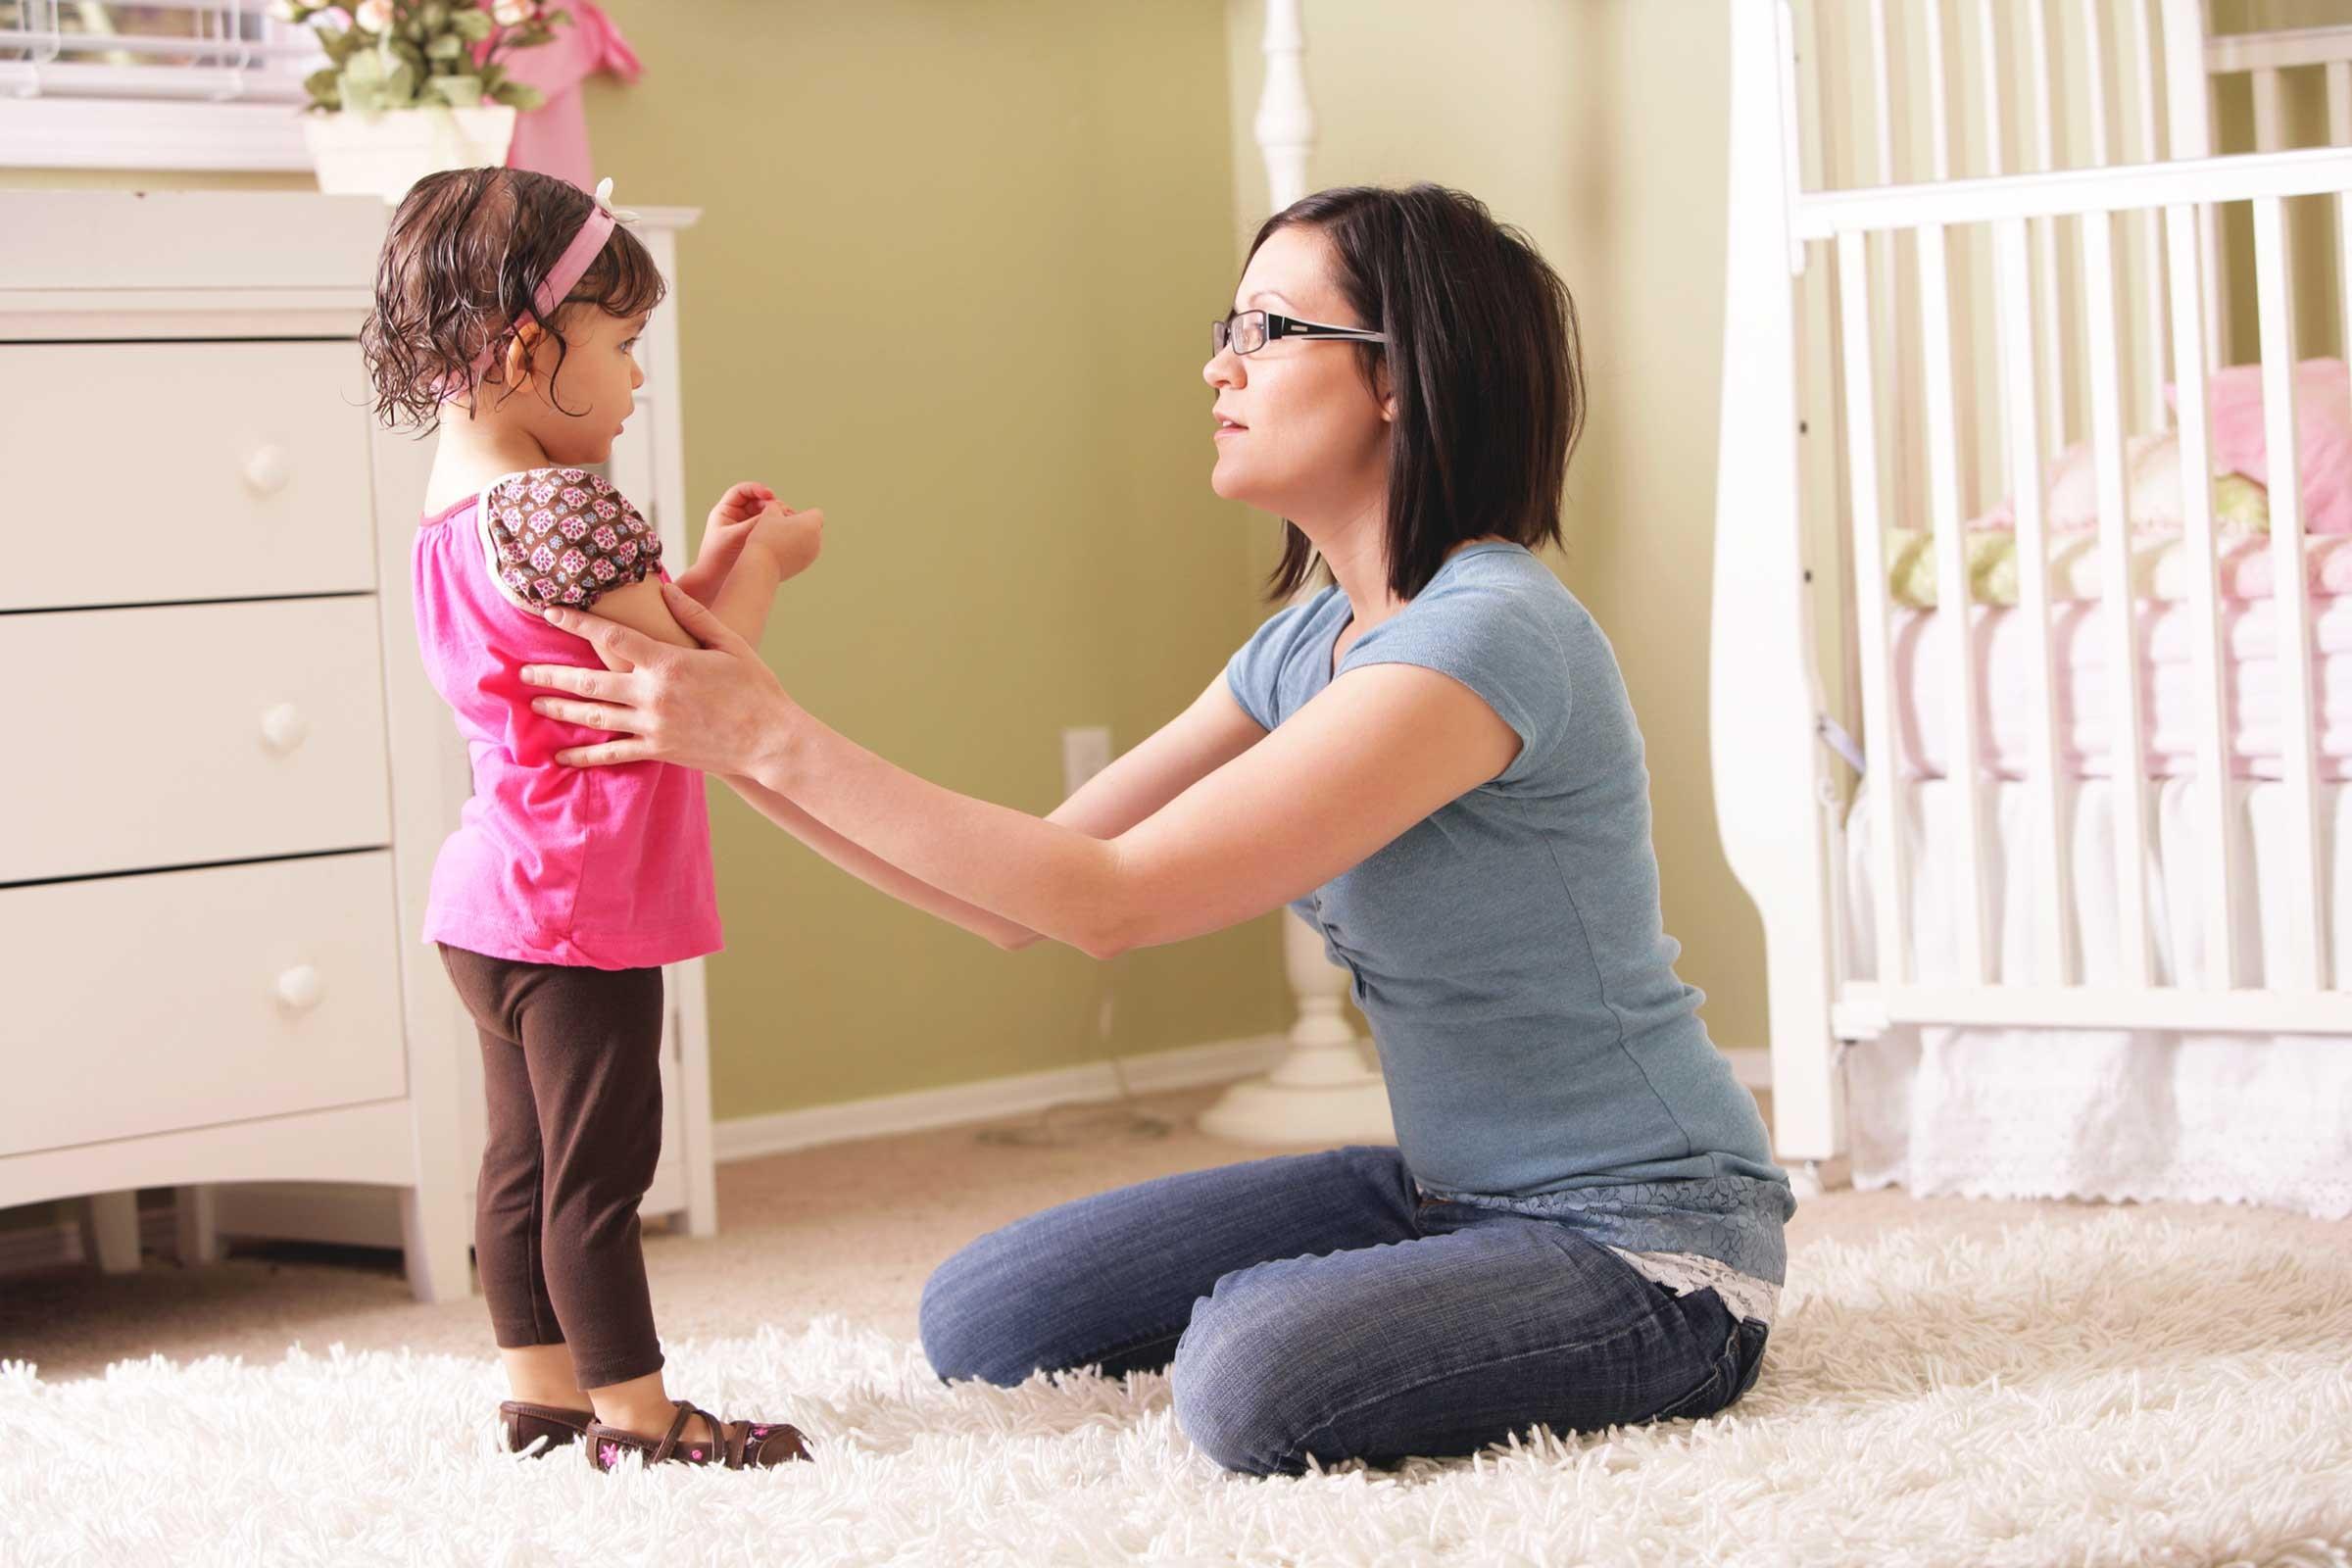 7 habits that will strengthen the bond between you and your child #4